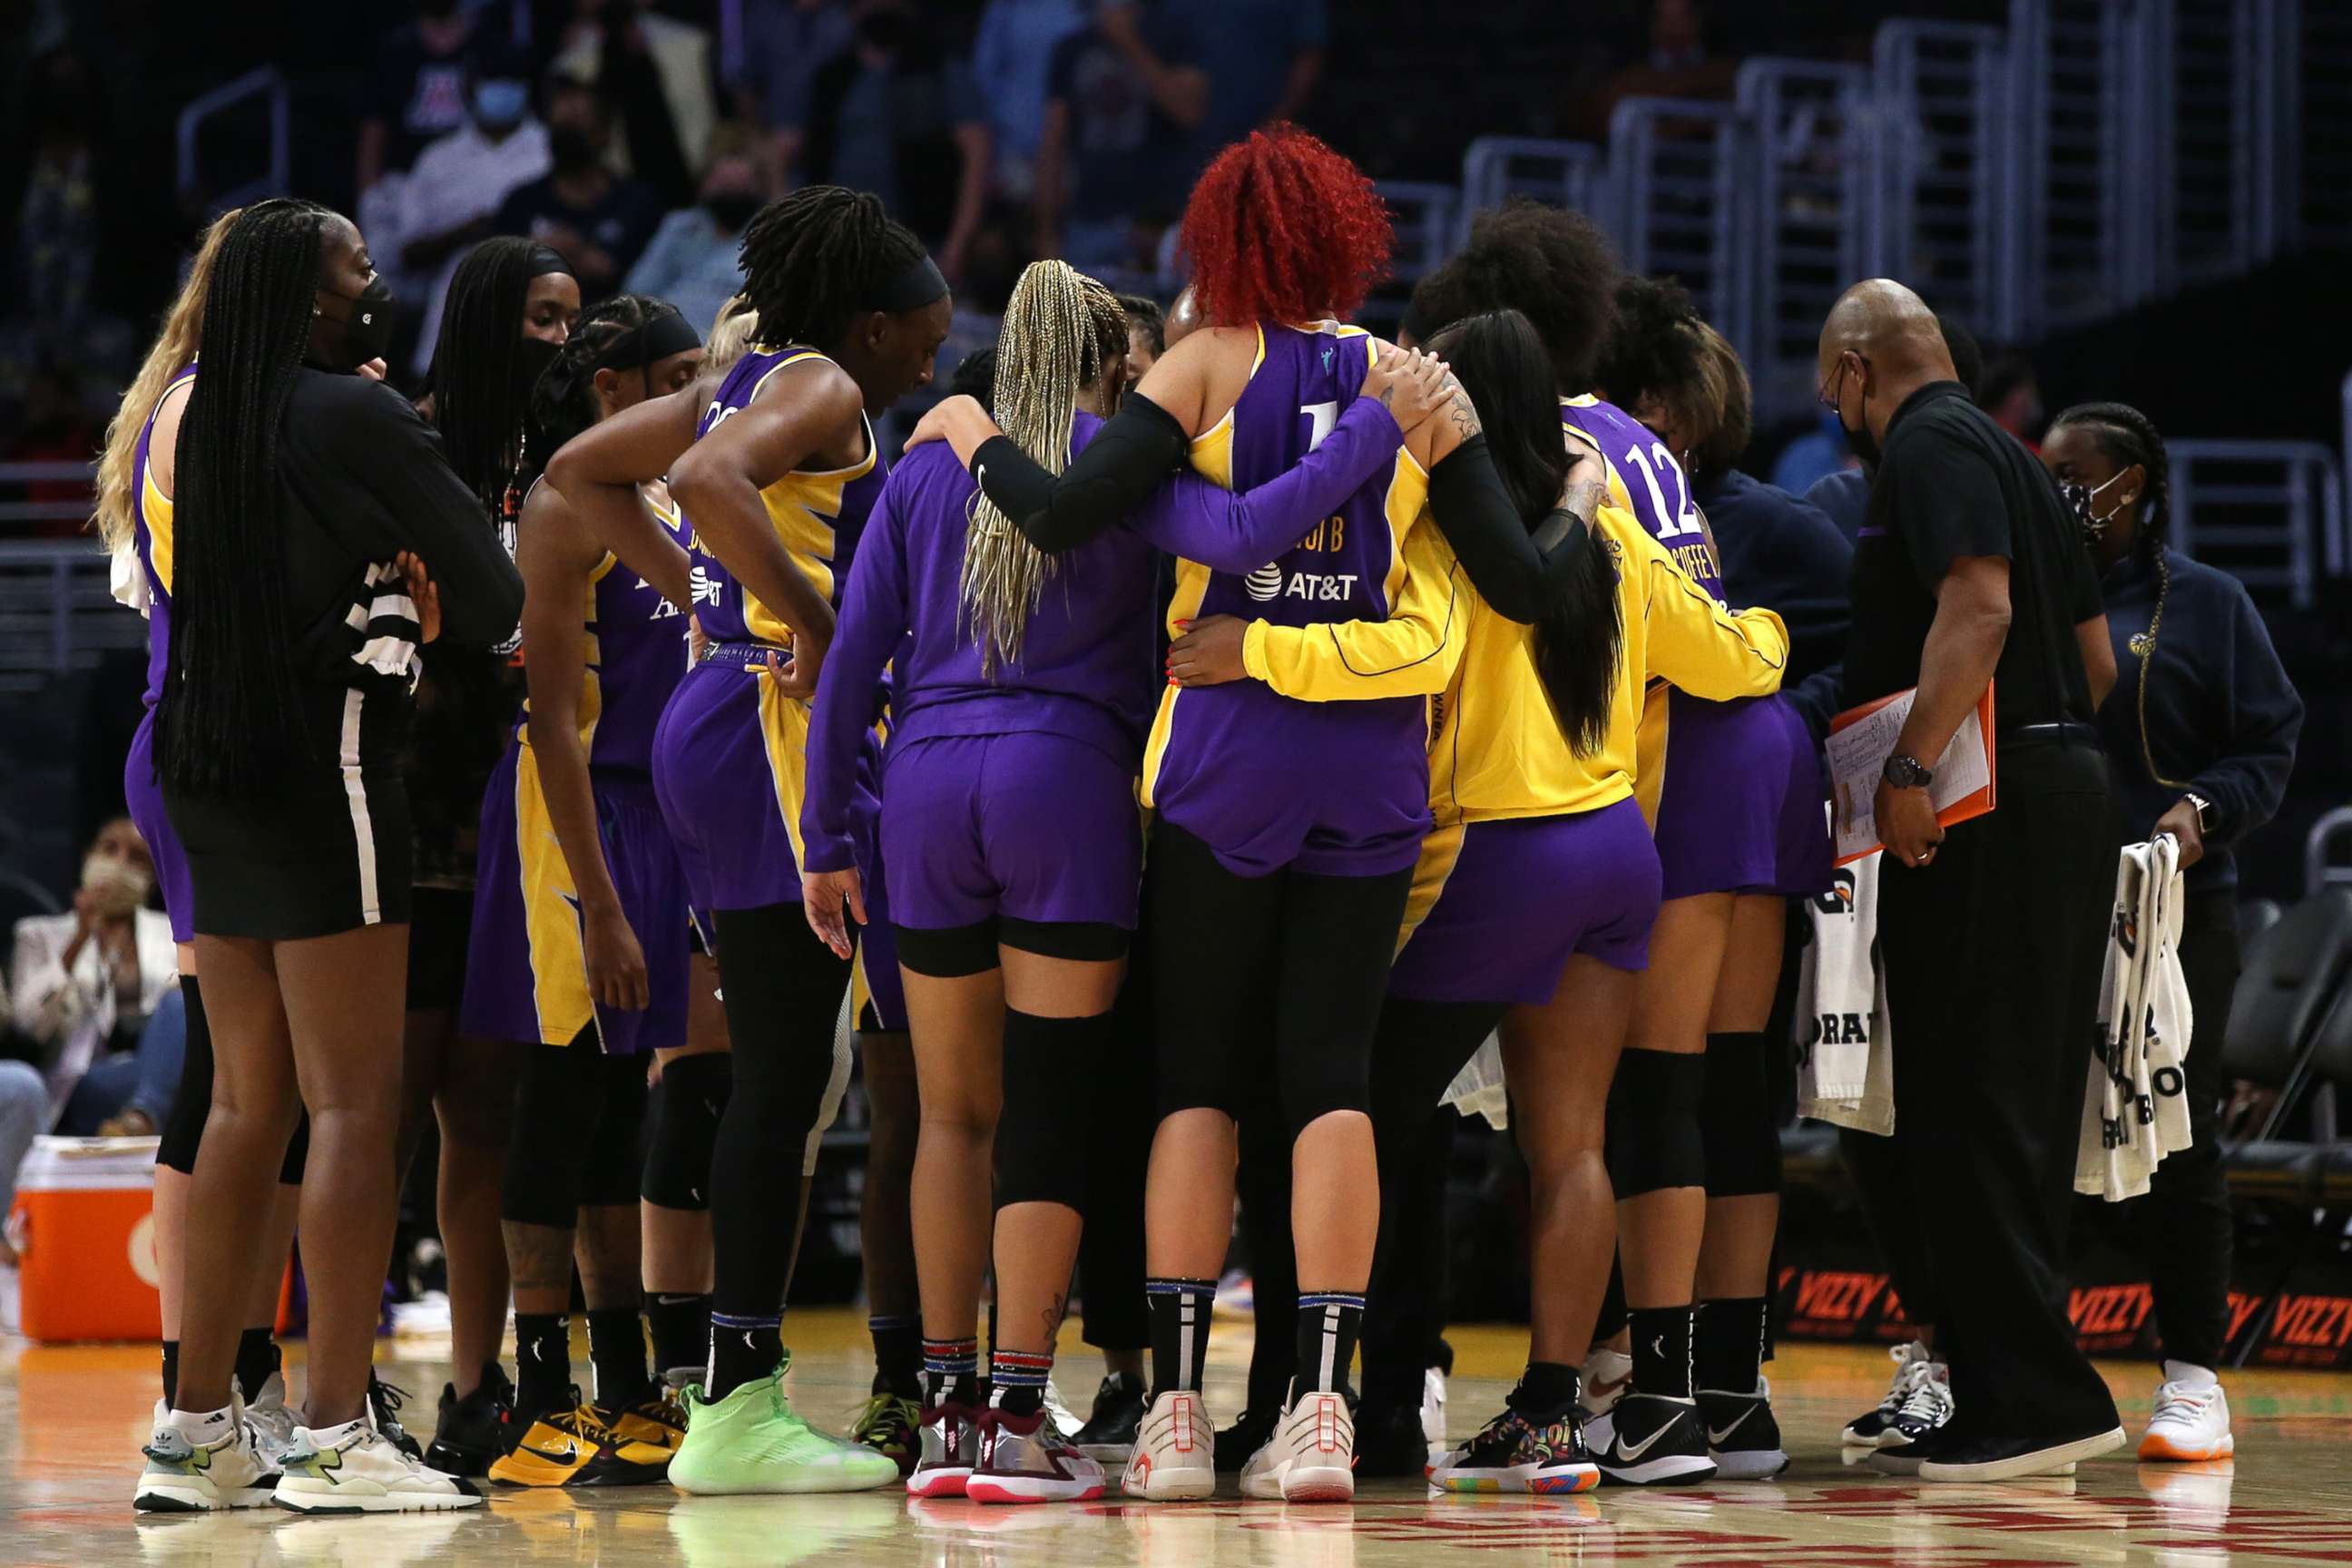 PHOTO: In this Aug. 17, 2021 file photo The Los Angeles Sparks huddle on the court at Staples Center in Los Angeles. 99% of the WNBA  league is vaccinated according the the WNBA.